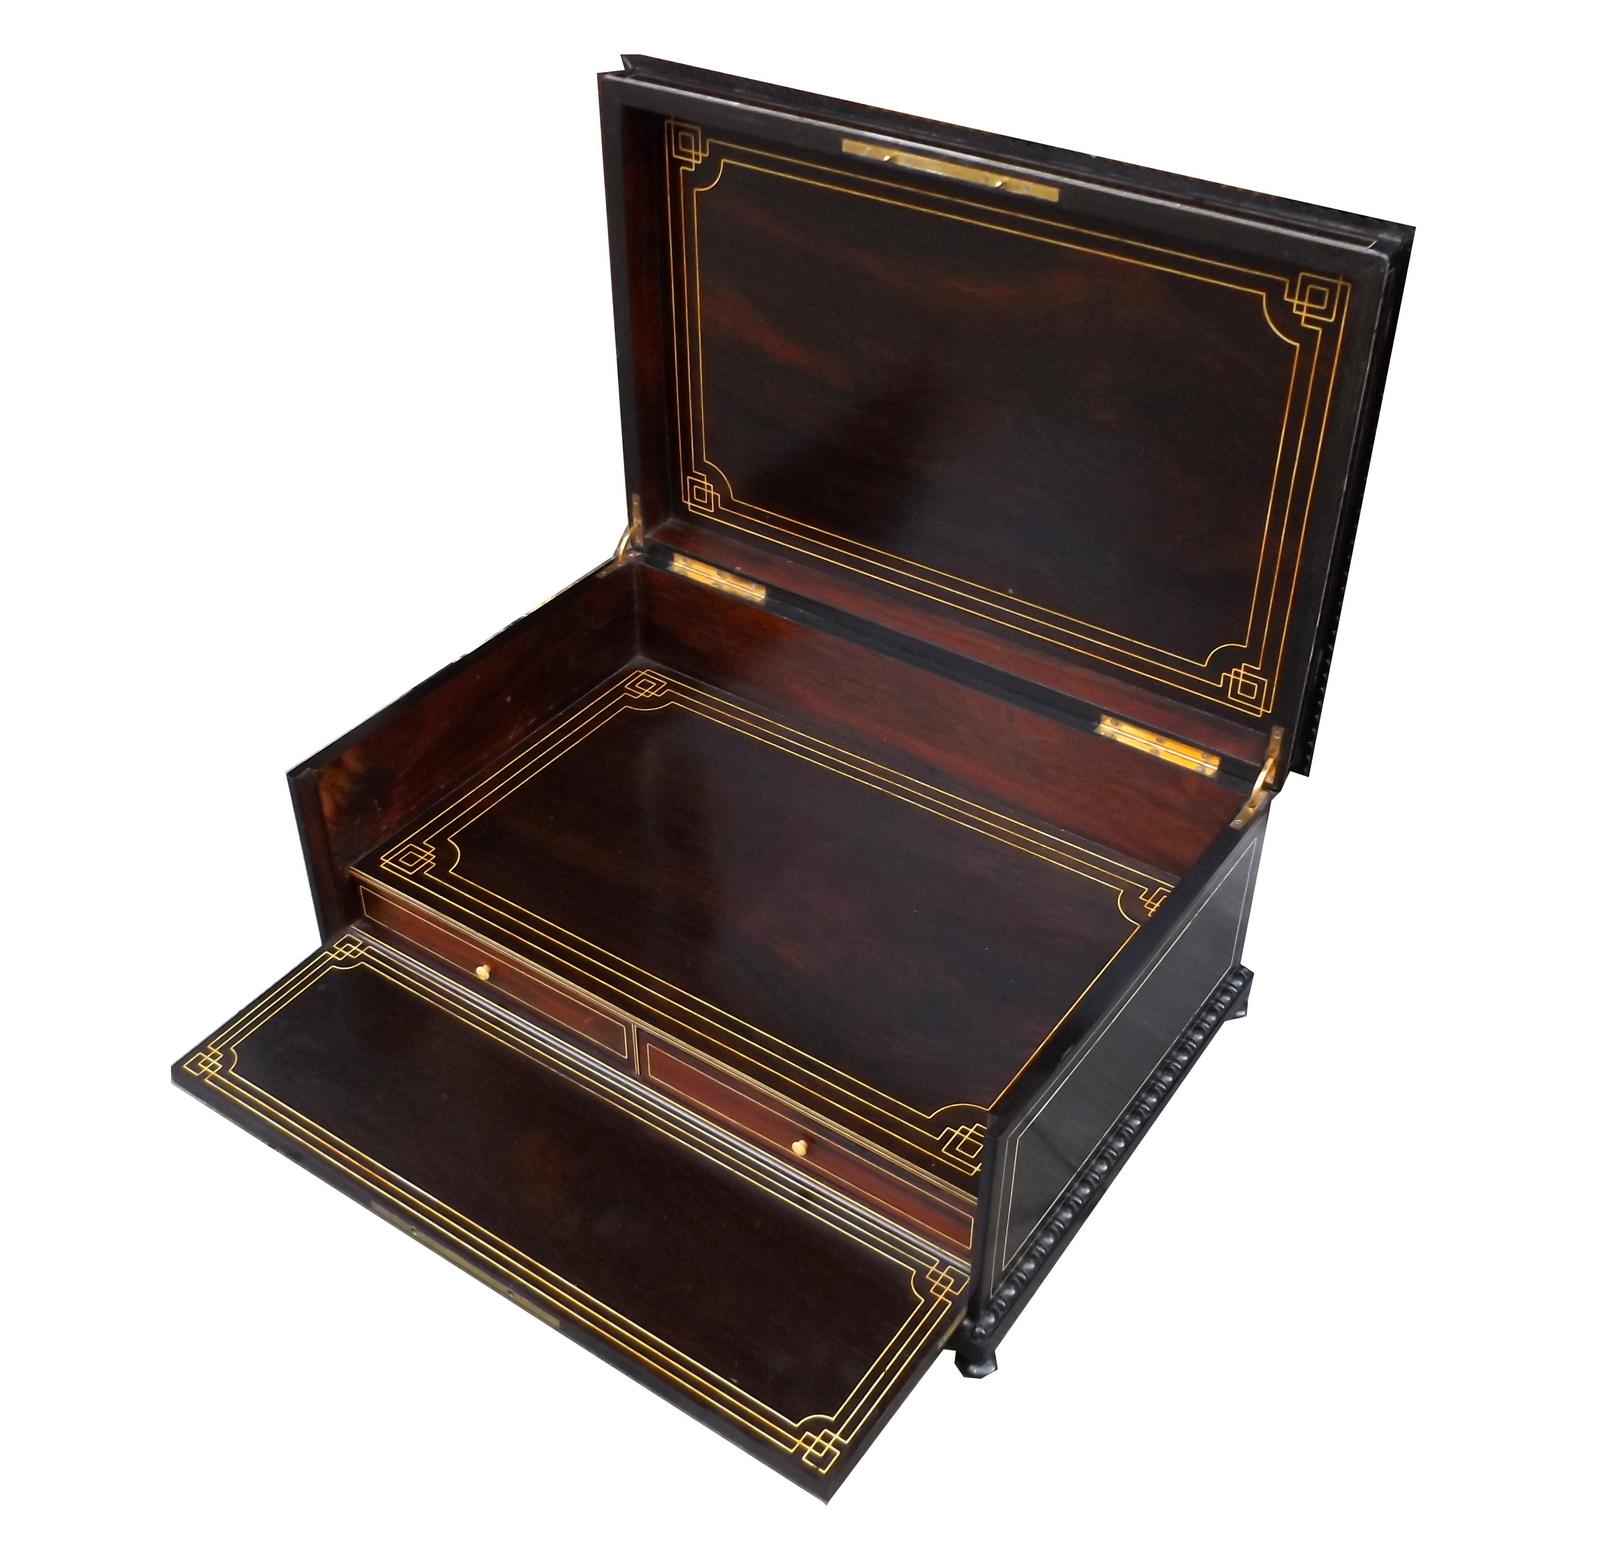 A very elegant large French dark mahogany inlaid with ebony, mother of pearl, Abalone and brass stringing casket of very generous proportions and of outstanding Museum quality, firmly attributed to Alphonse Tahan Paris (1830-1880), official master